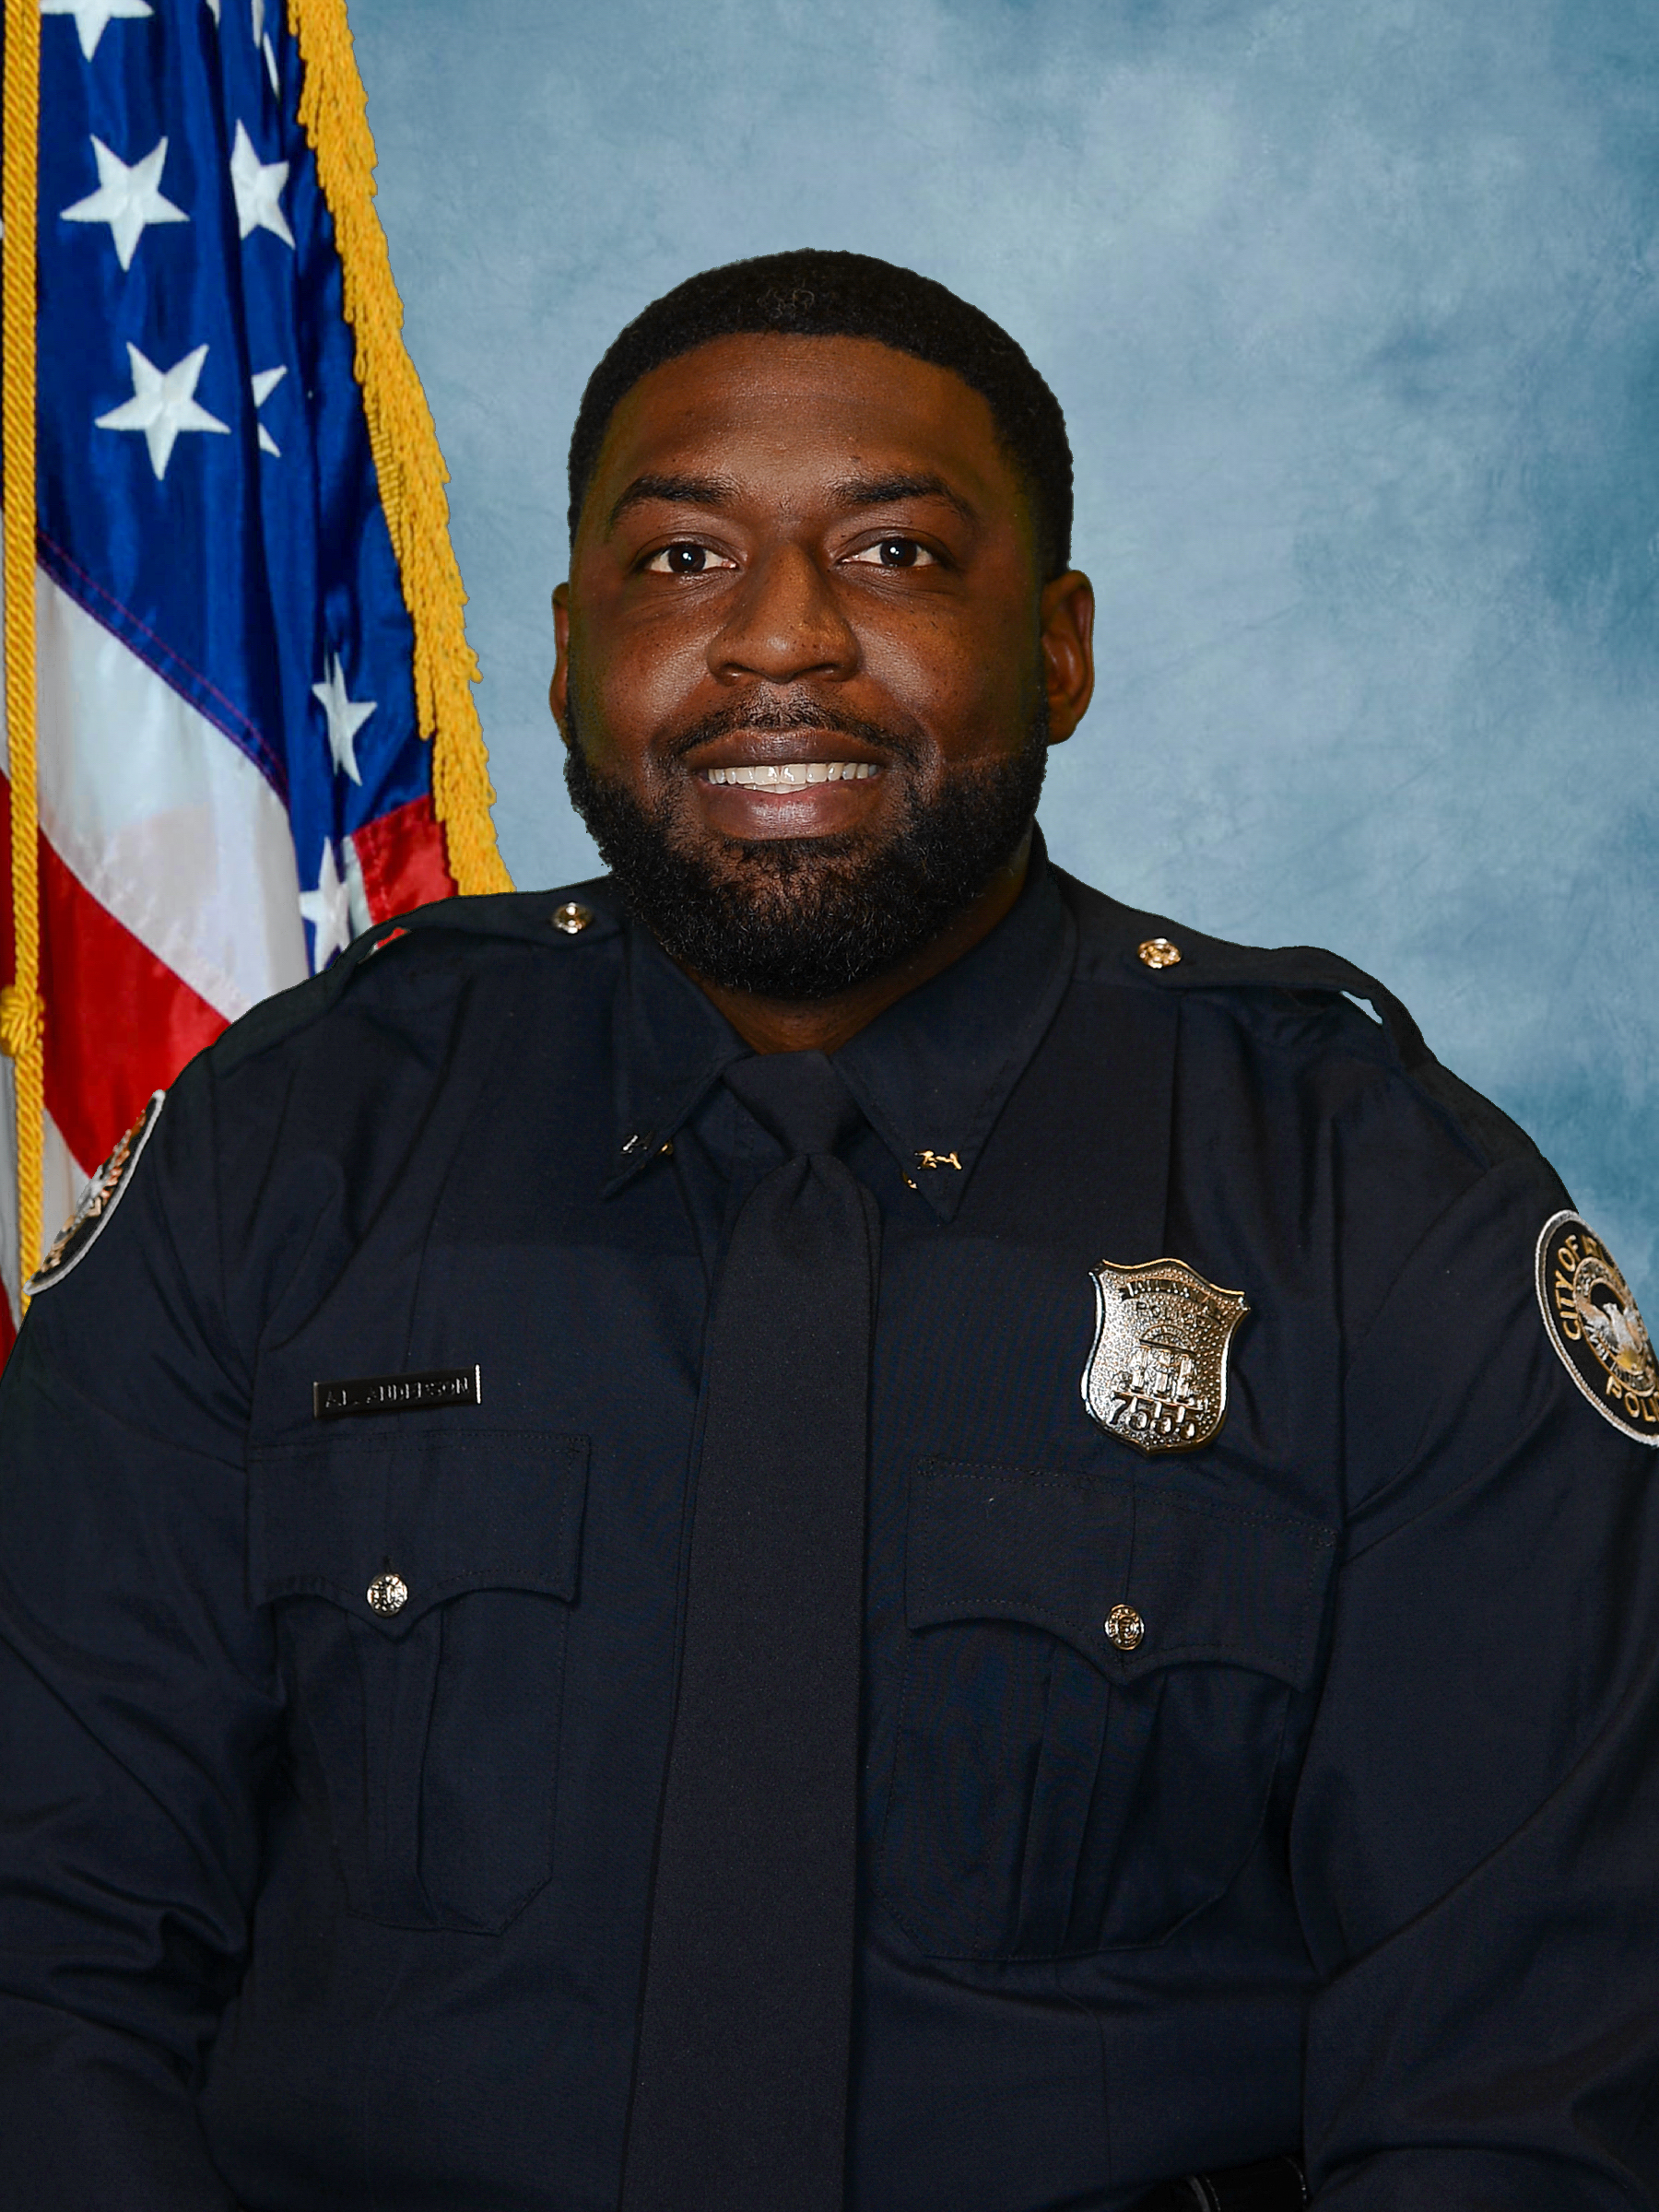 Atlanta Police Department officer Anthony Anderson charged sexual assault minor